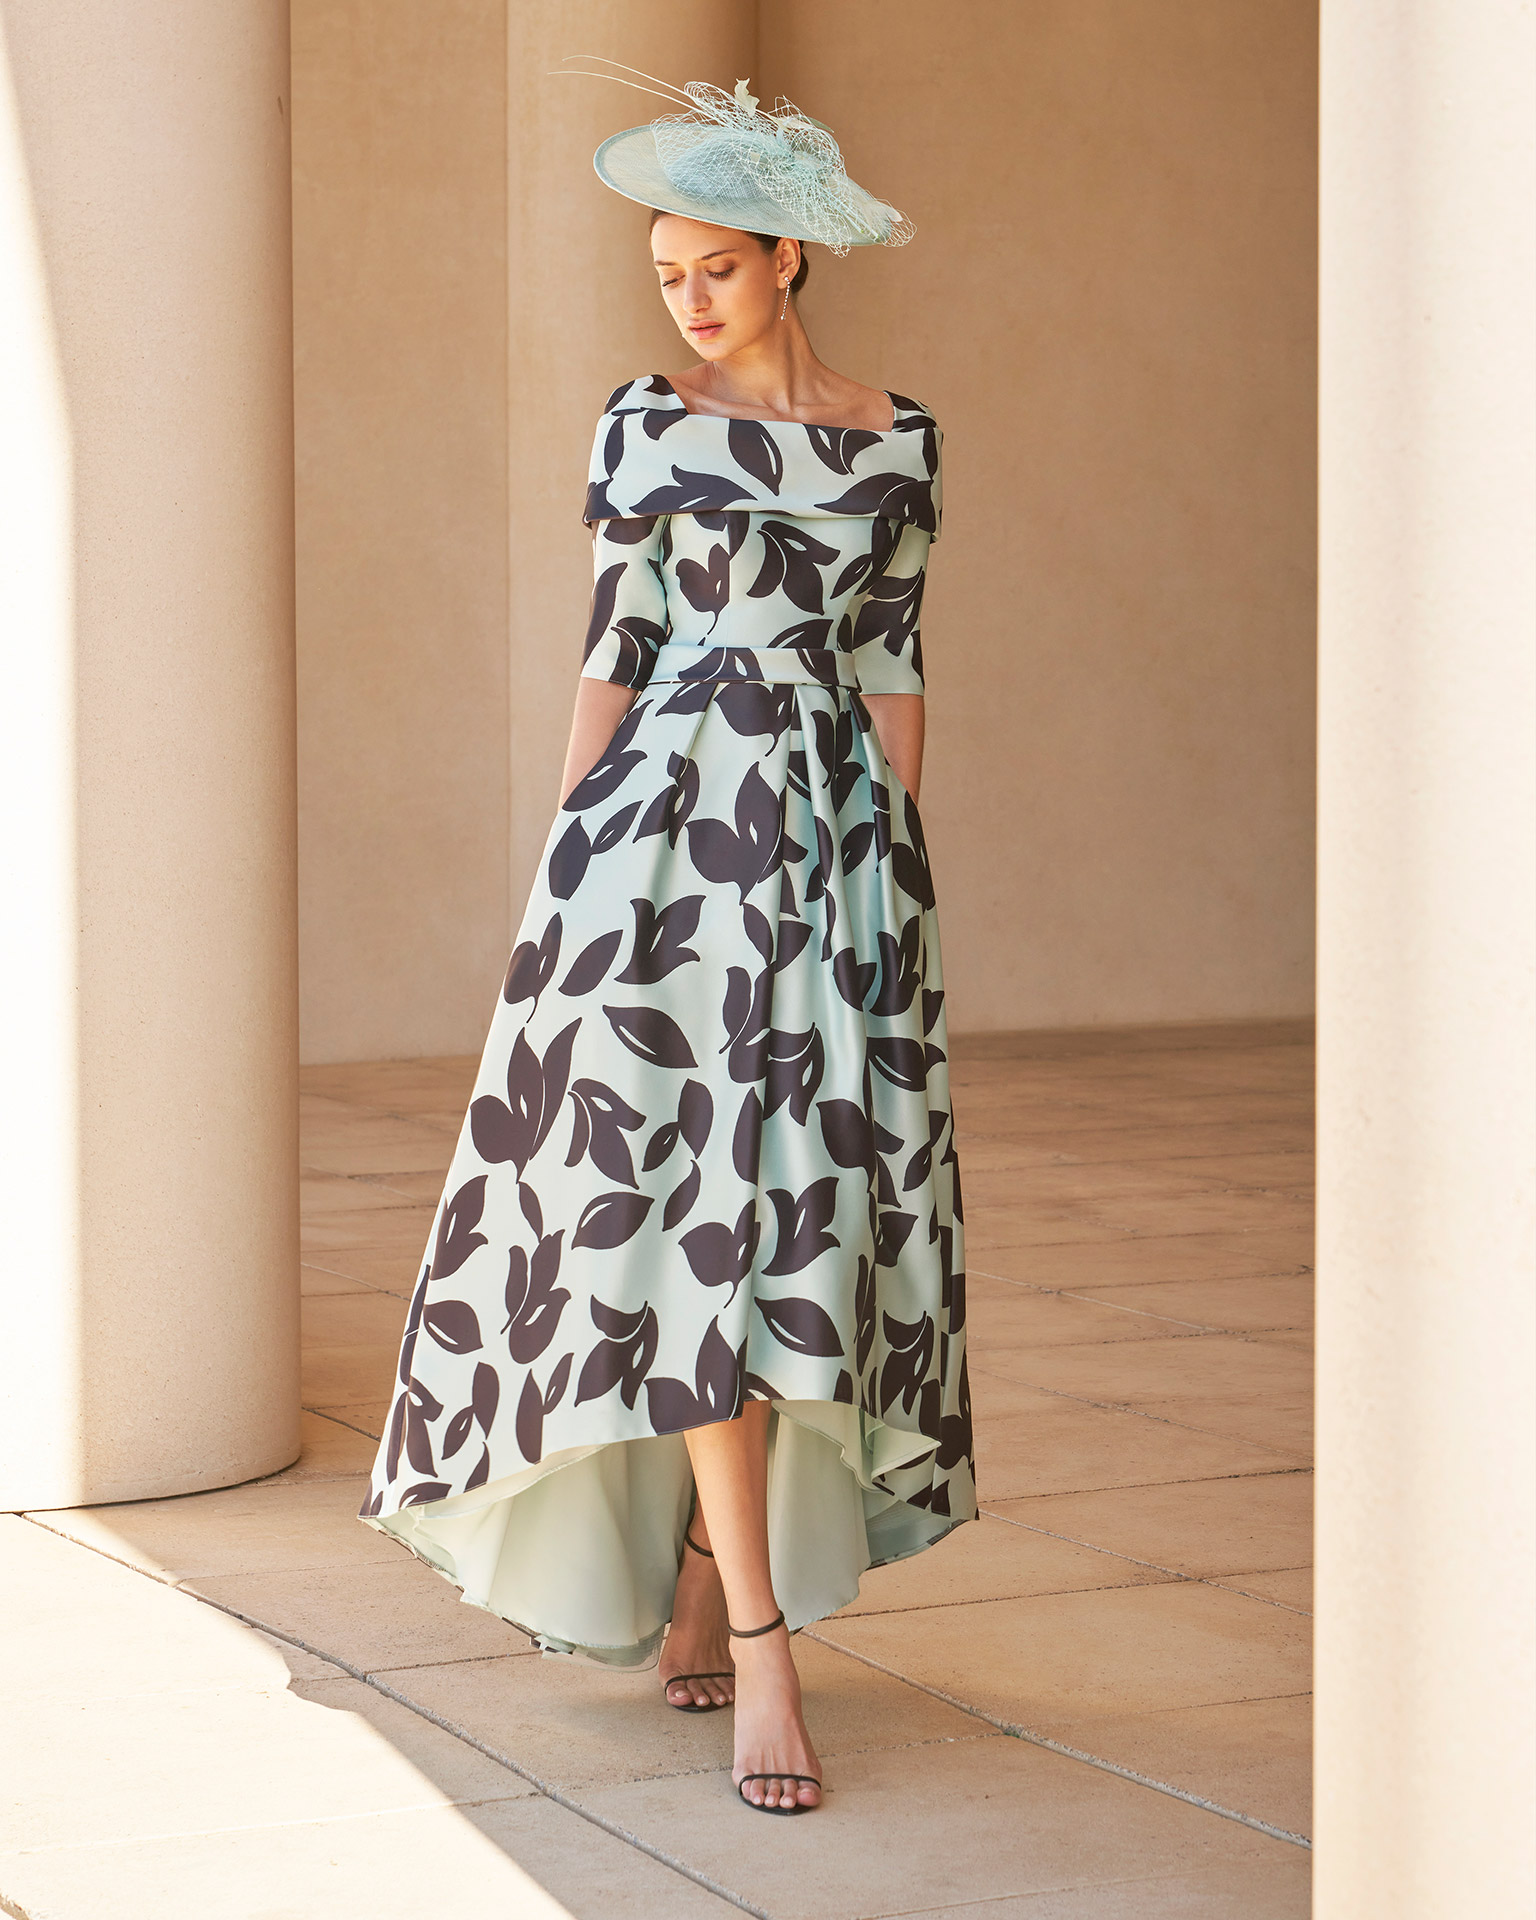 Classic midi evening dress, made in printed satin, with asymmetric skirt and belt detail. Couture Club outfit with cuff neckline and three-quarter sleeves. MARFIL_BARCELONA.